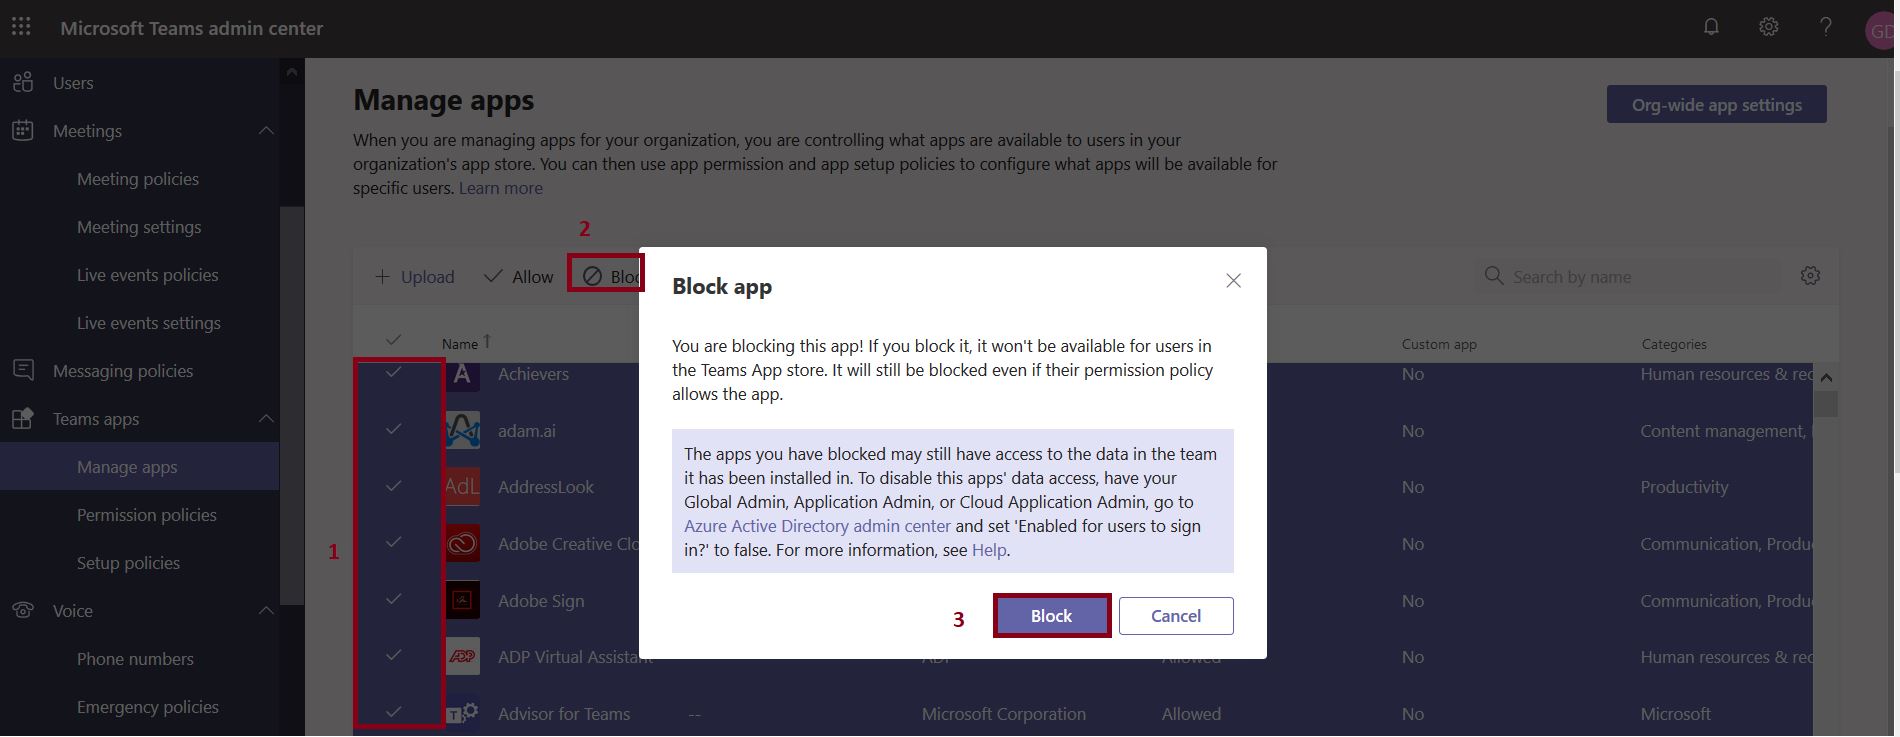 Manage apps in Microsoft Teams, how to block the app to be available for users in the Teams App store?